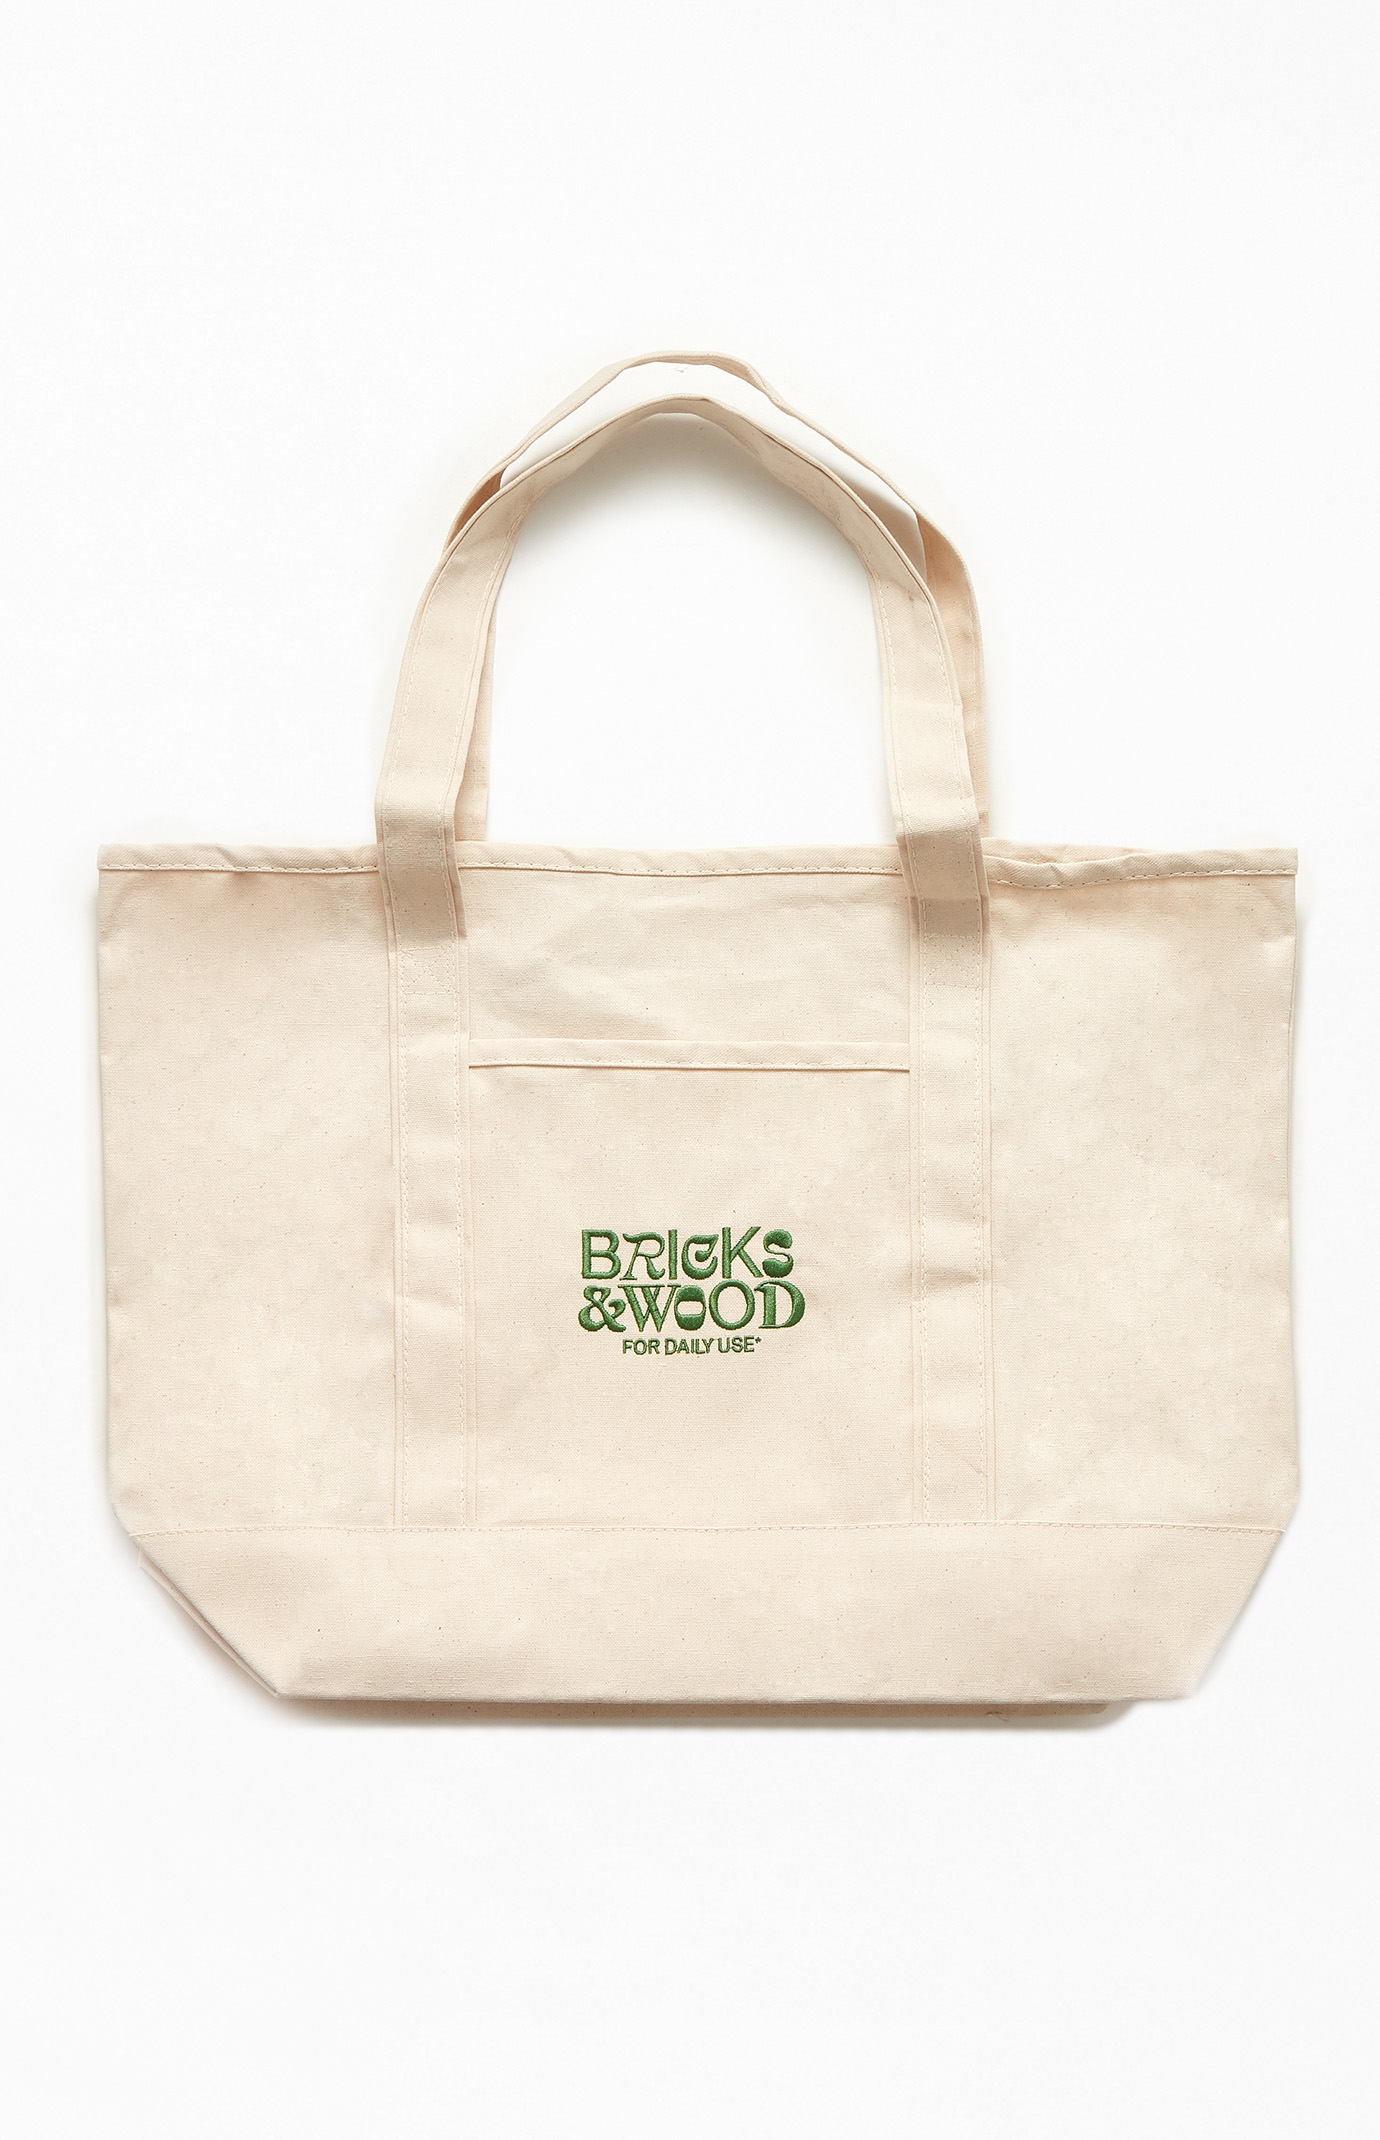 Bricks & Wood For Daily Use* Tote Bag | PacSun